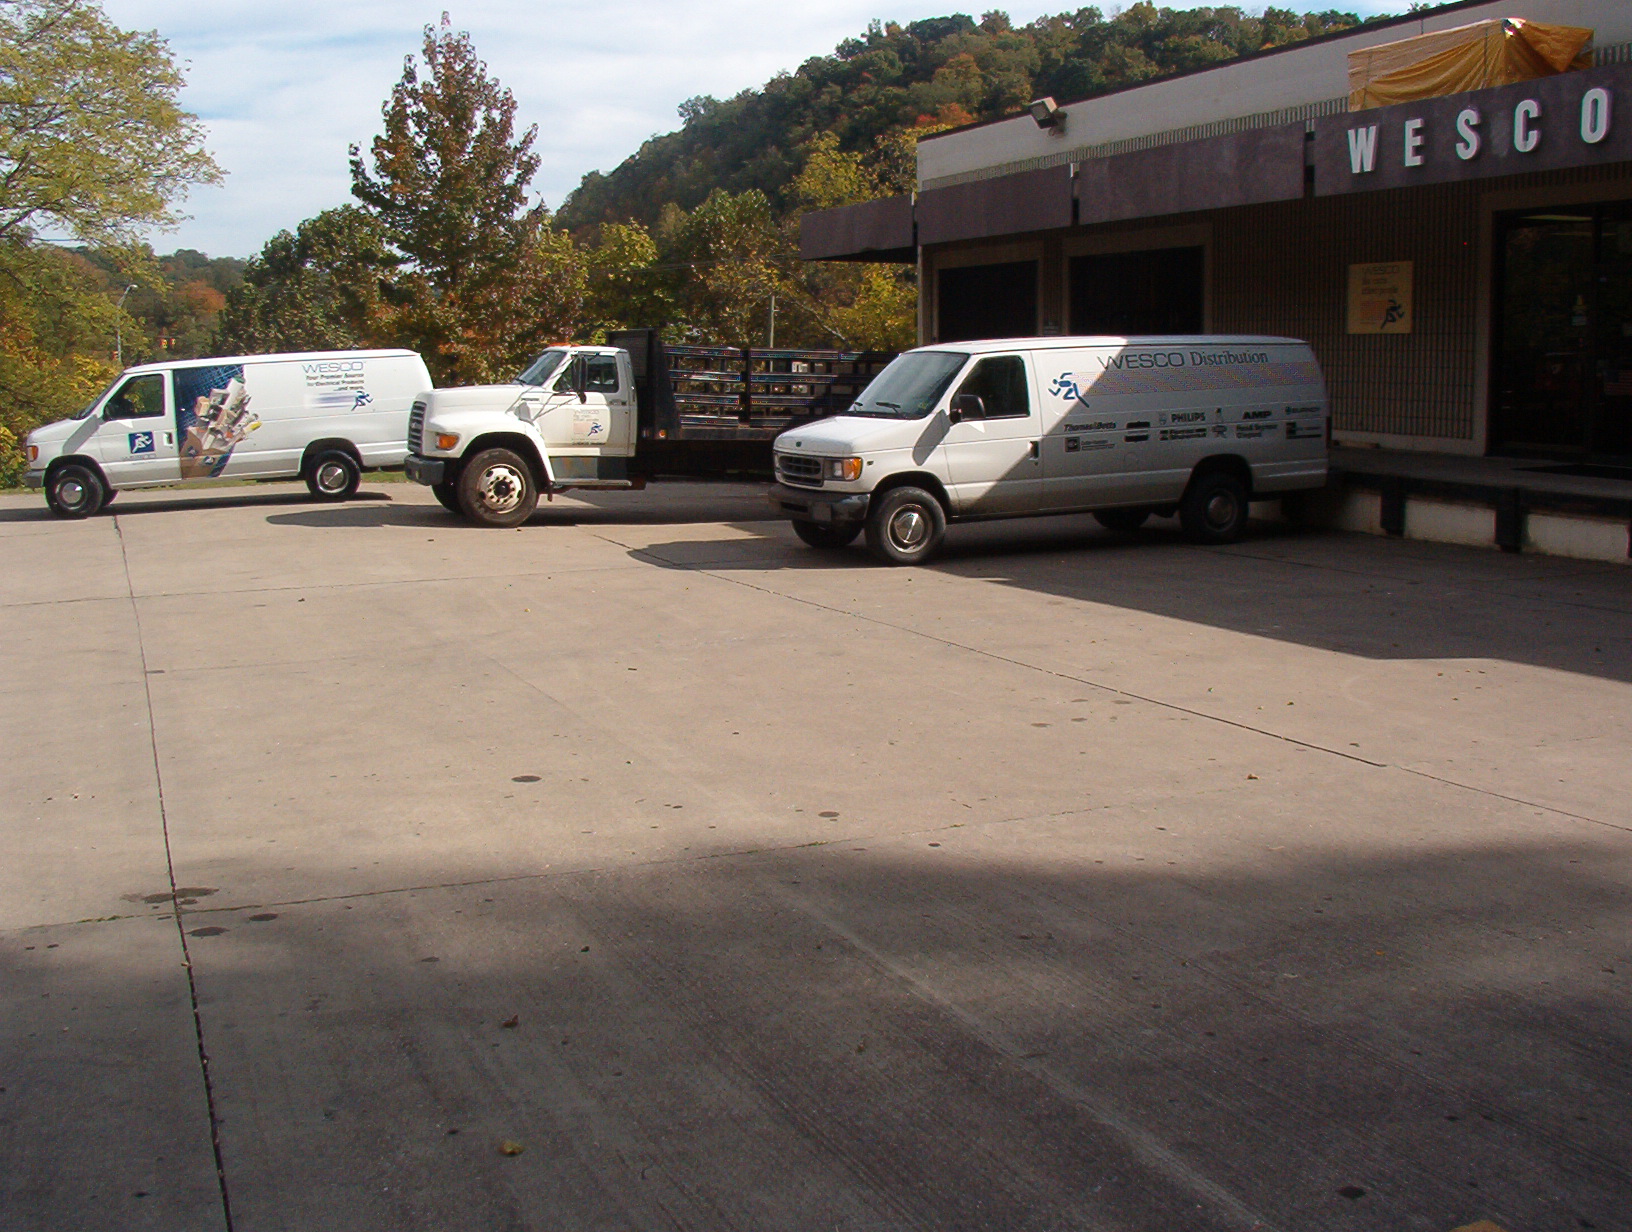 Wesco, the state's contractor for lighting and bulbs, has five locations throughout West Virginia.